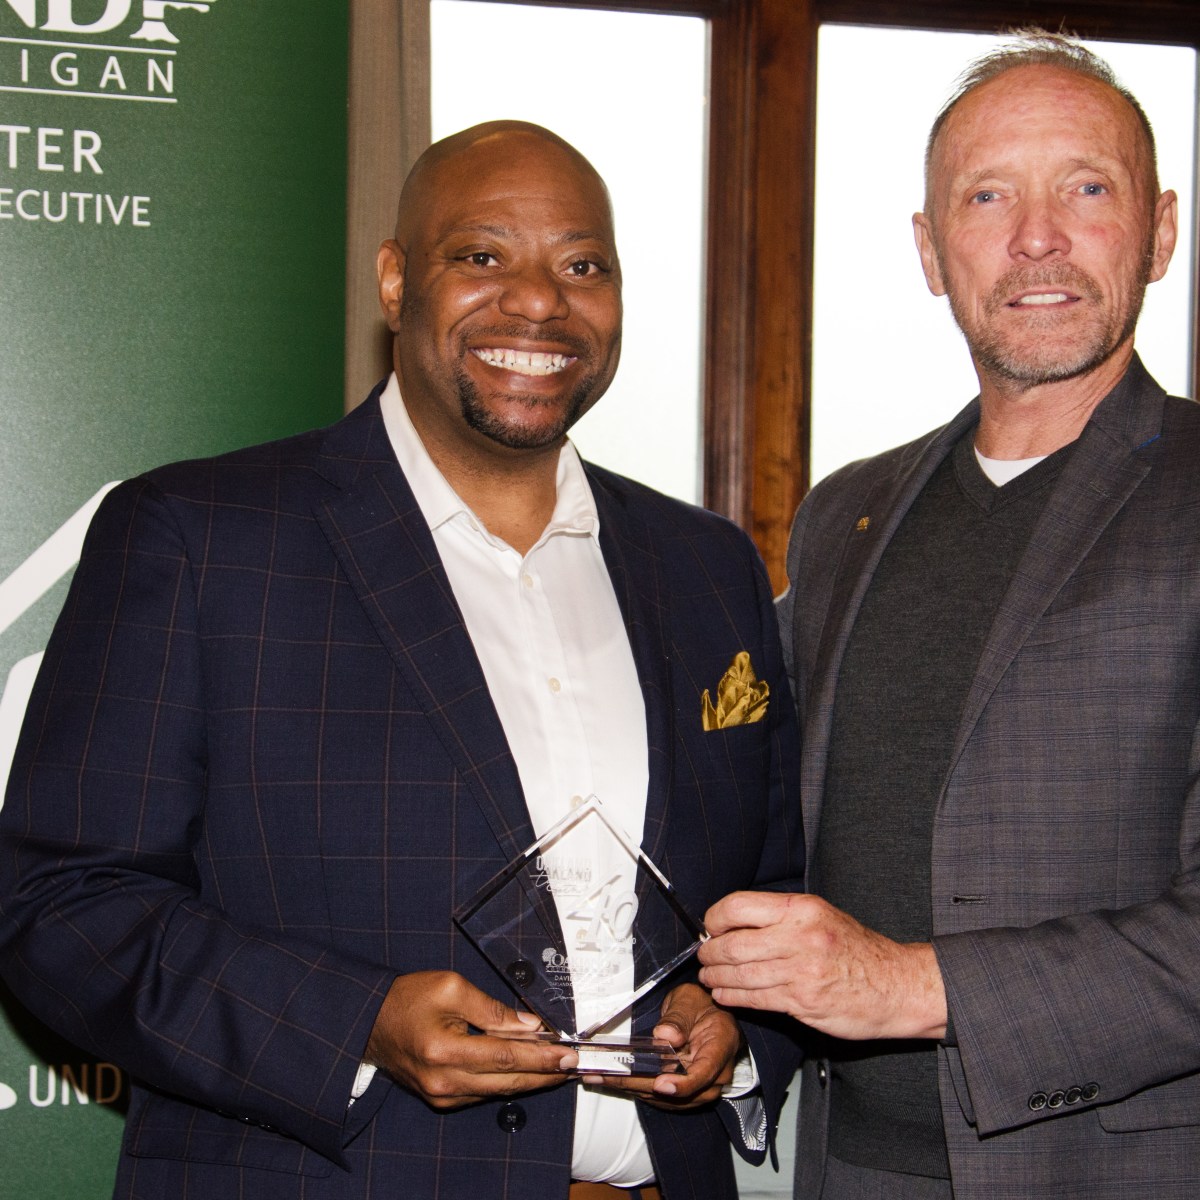 Kermit Williams accepts 40 Under 40 Award from Oakland County Executive